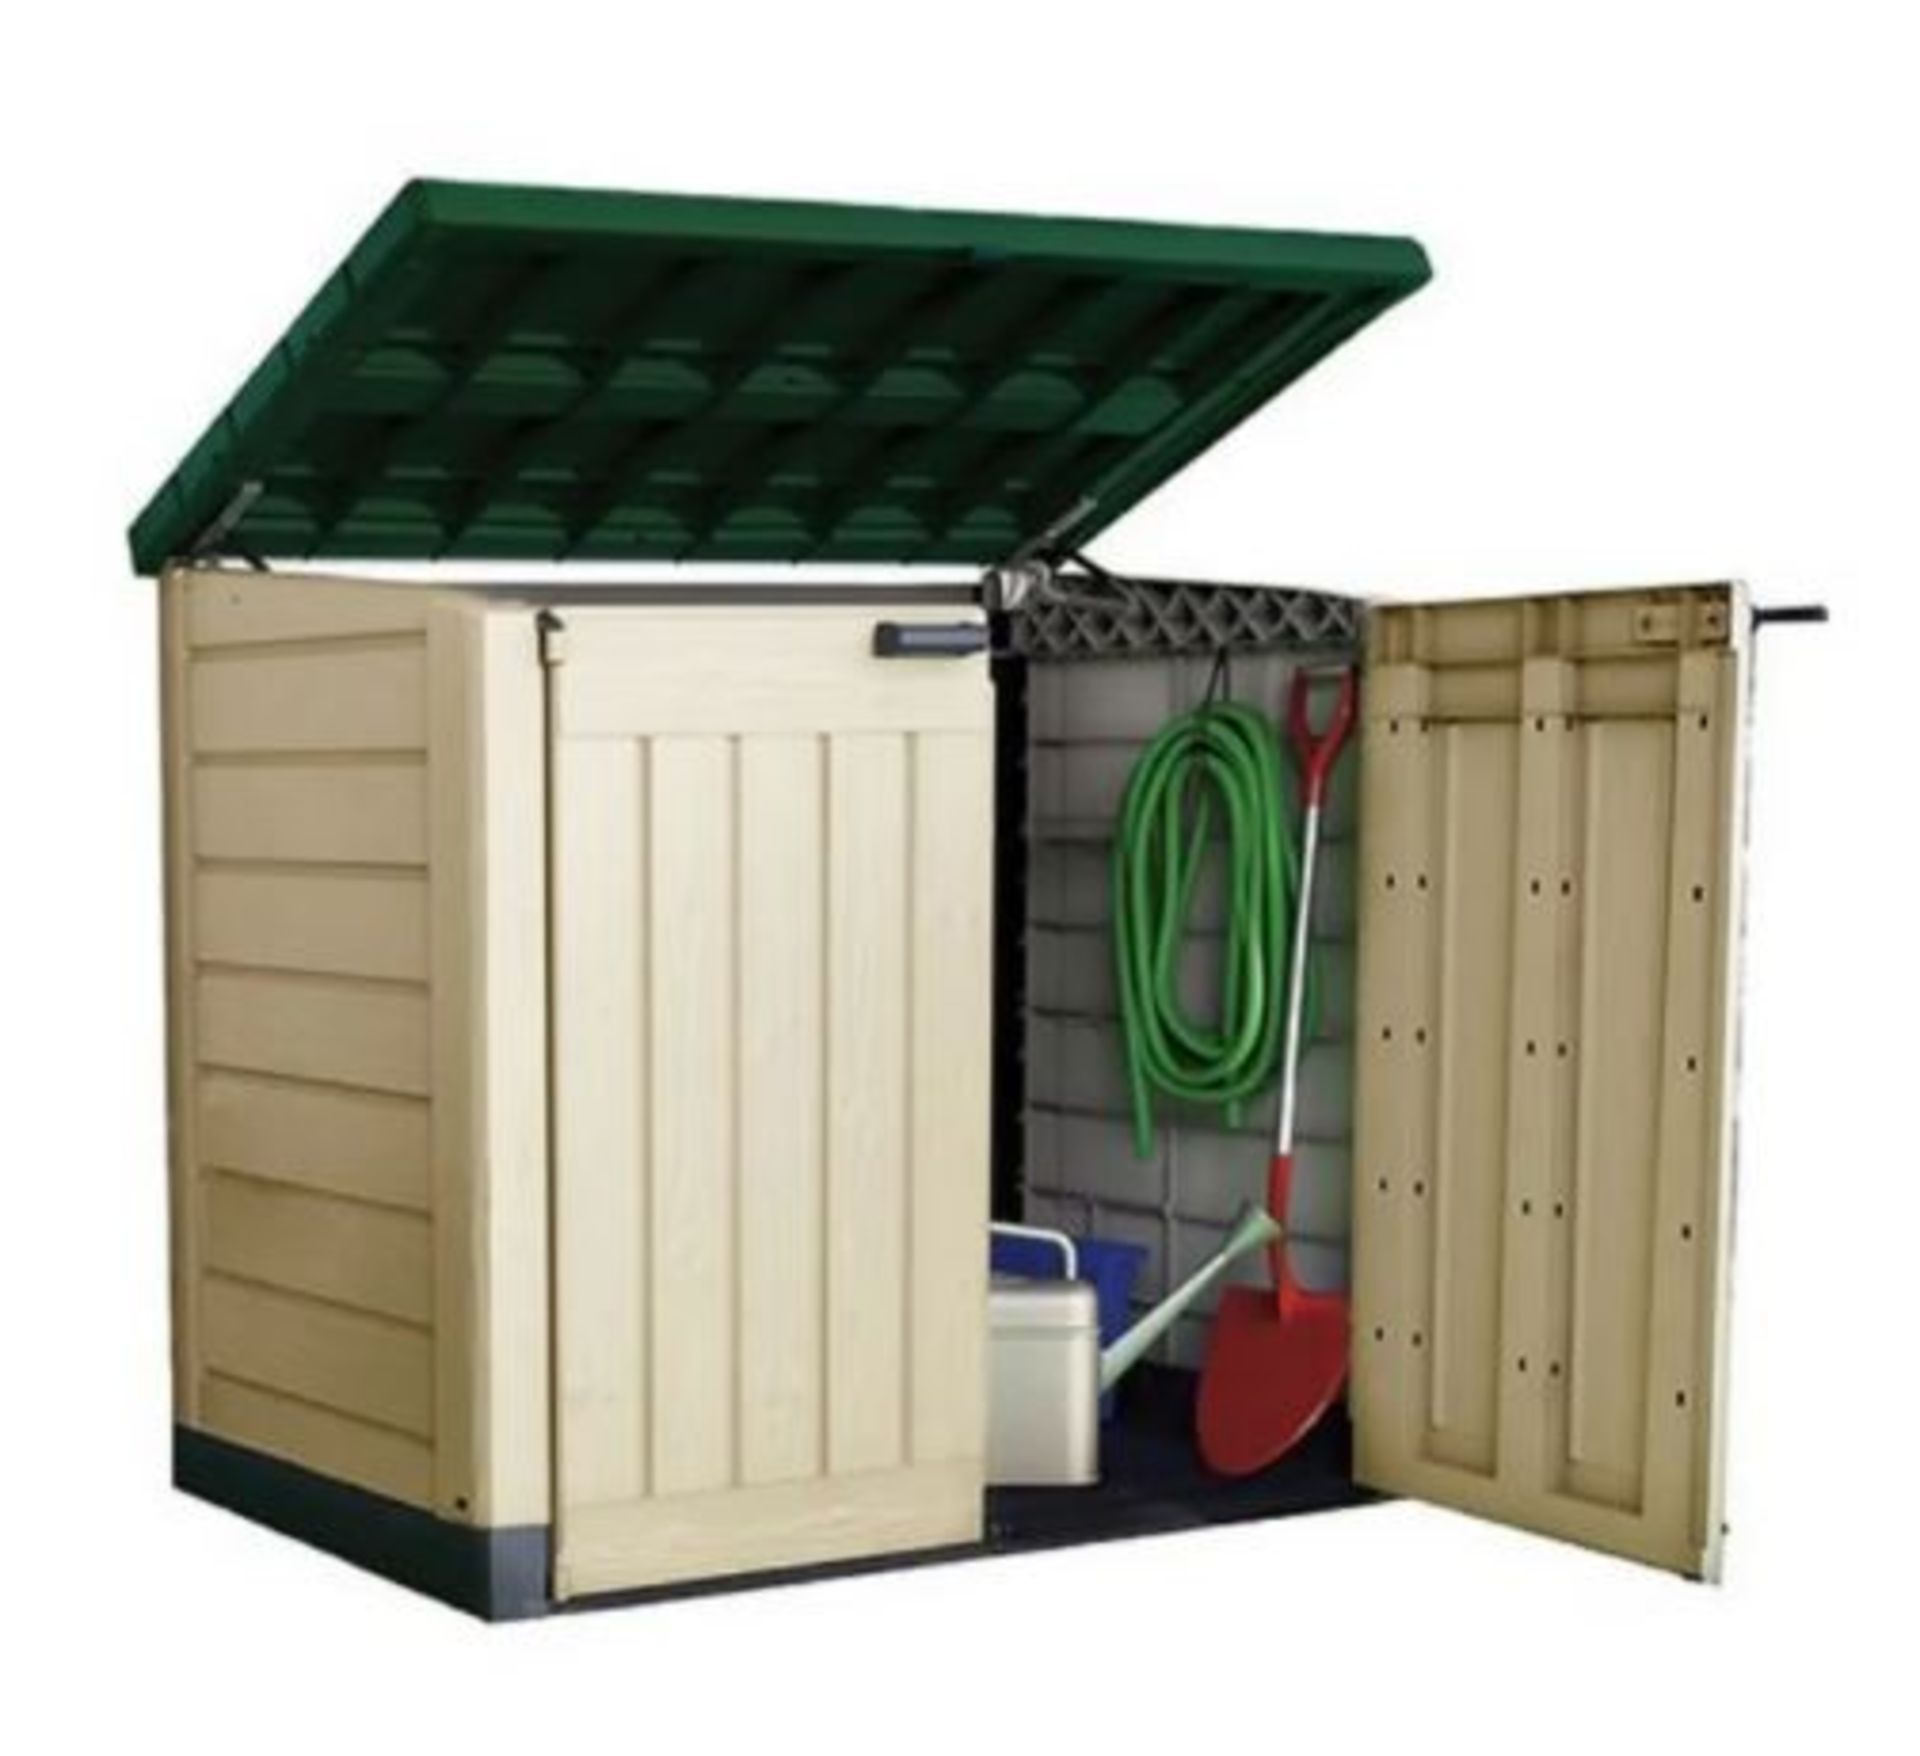 1x Keter Store It Out Max RRP £160. 1200L Beige And Green (H125x W145.5x D82cm) - Image 5 of 7